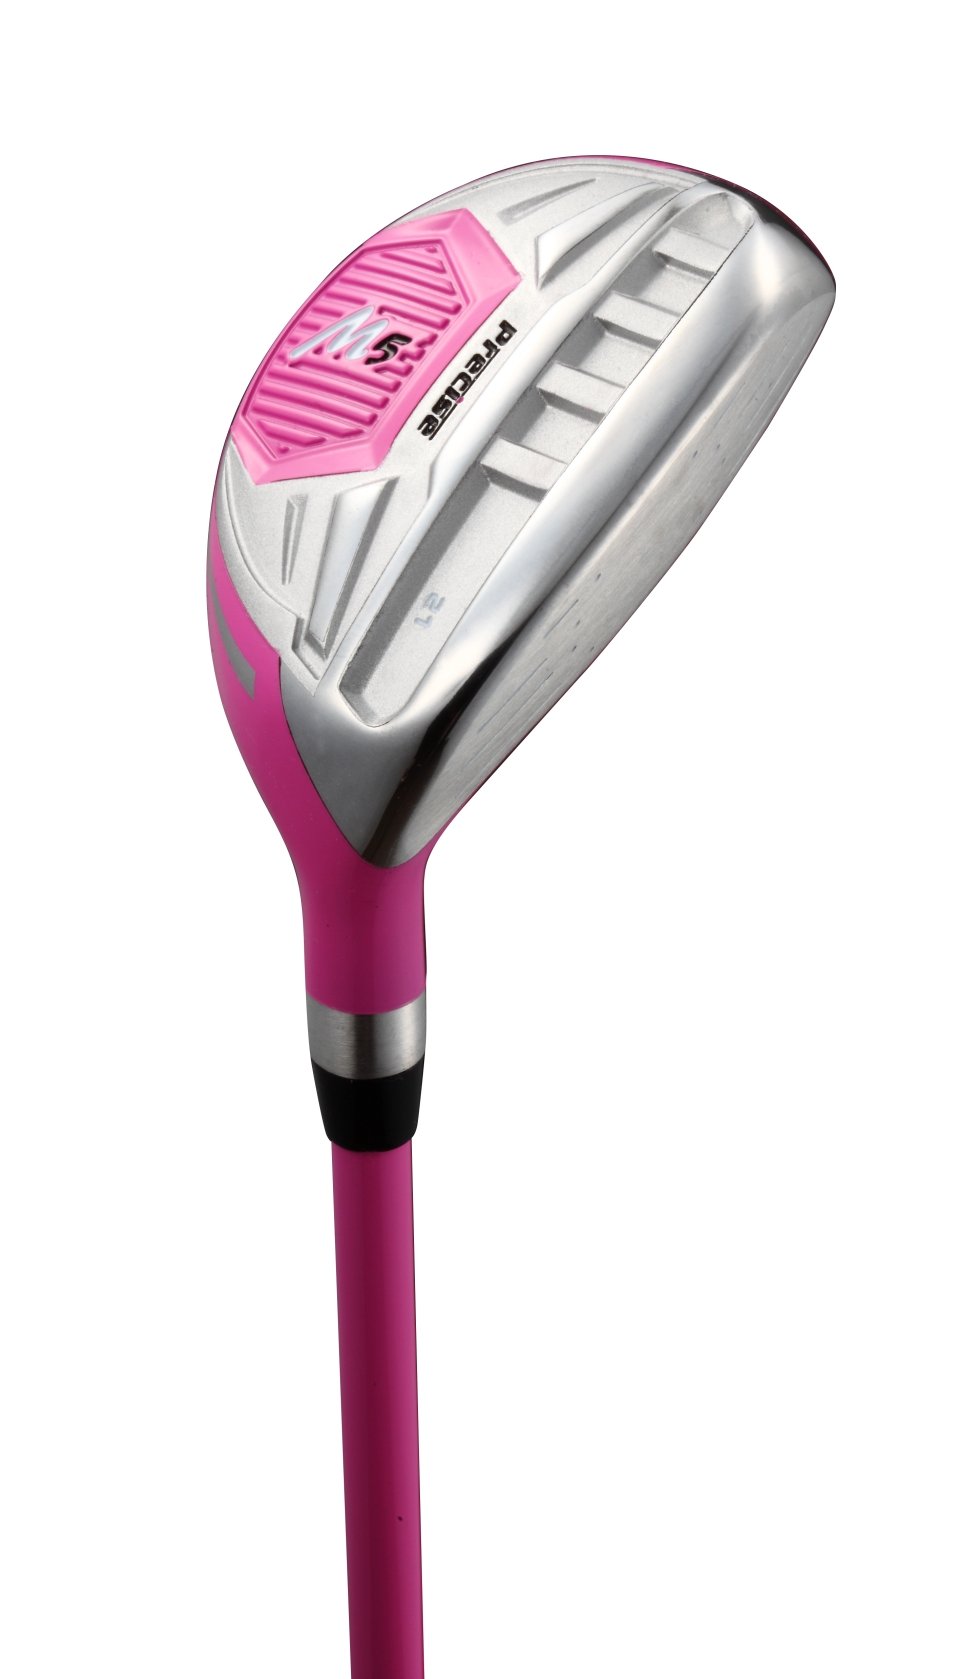 Precise M5 Ladies Womens Complete Right Handed Golf Clubs Set Includes Titanium Driver, S.S. Fairway, S.S. Hybrid, S.S. 5-PW Irons, Putter, Stand Bag, 3 H/C's Pink